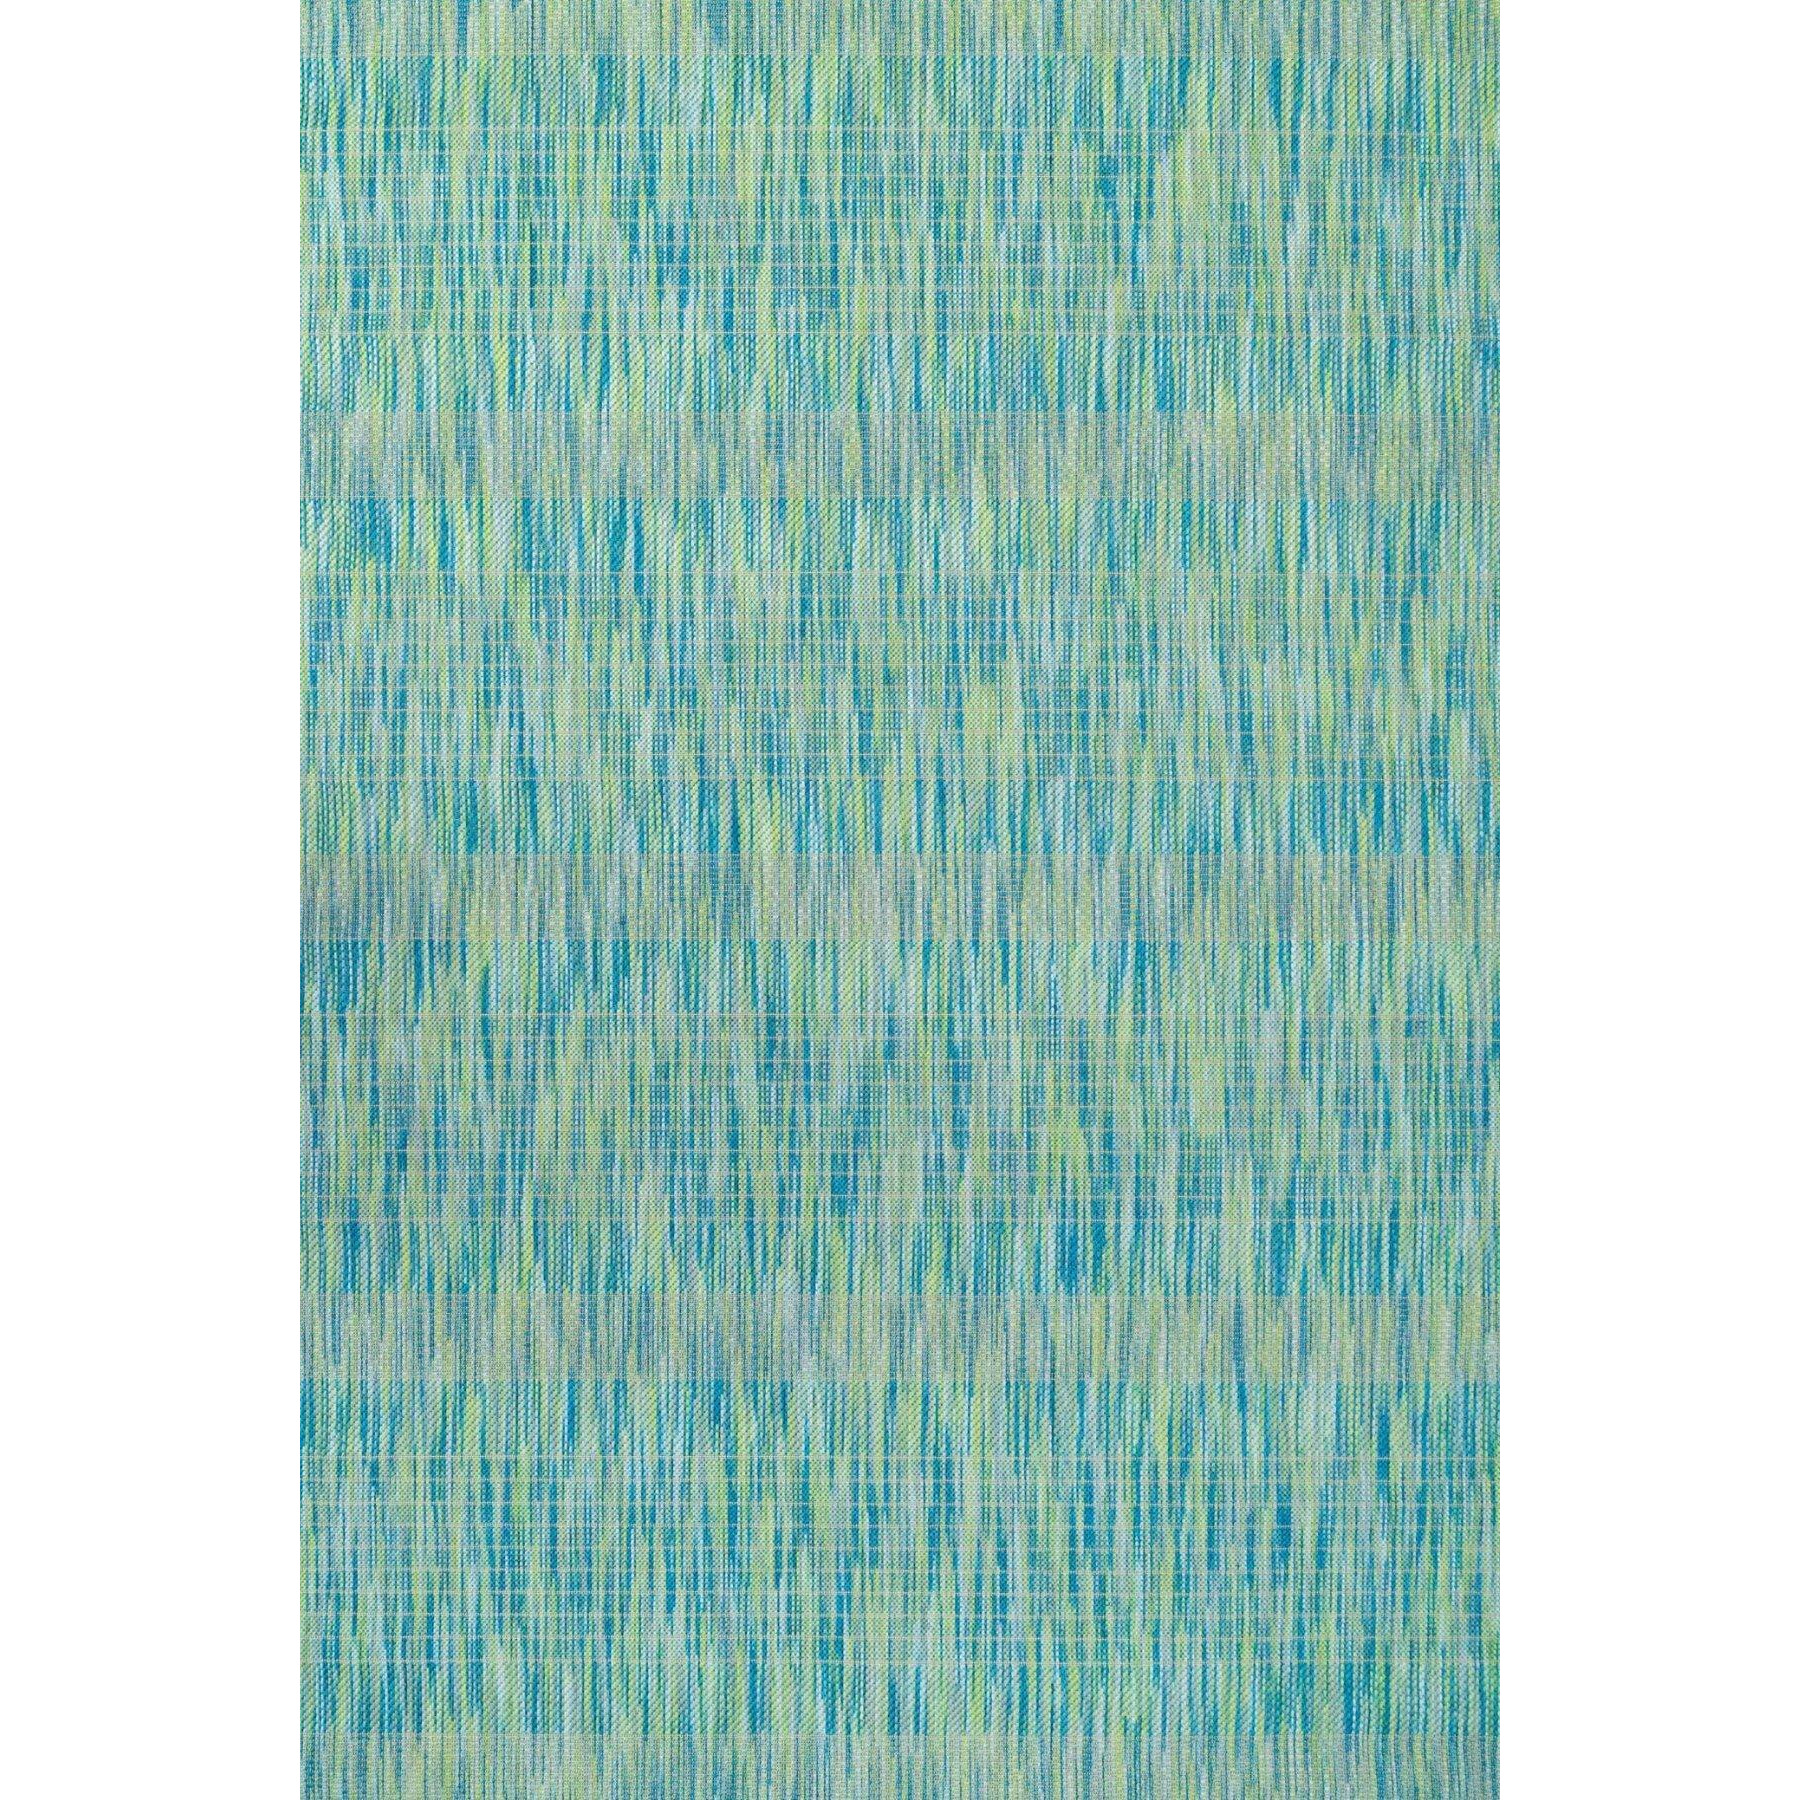 Teal Blue Outdoor, Garden and Patio Area Rug - image 1